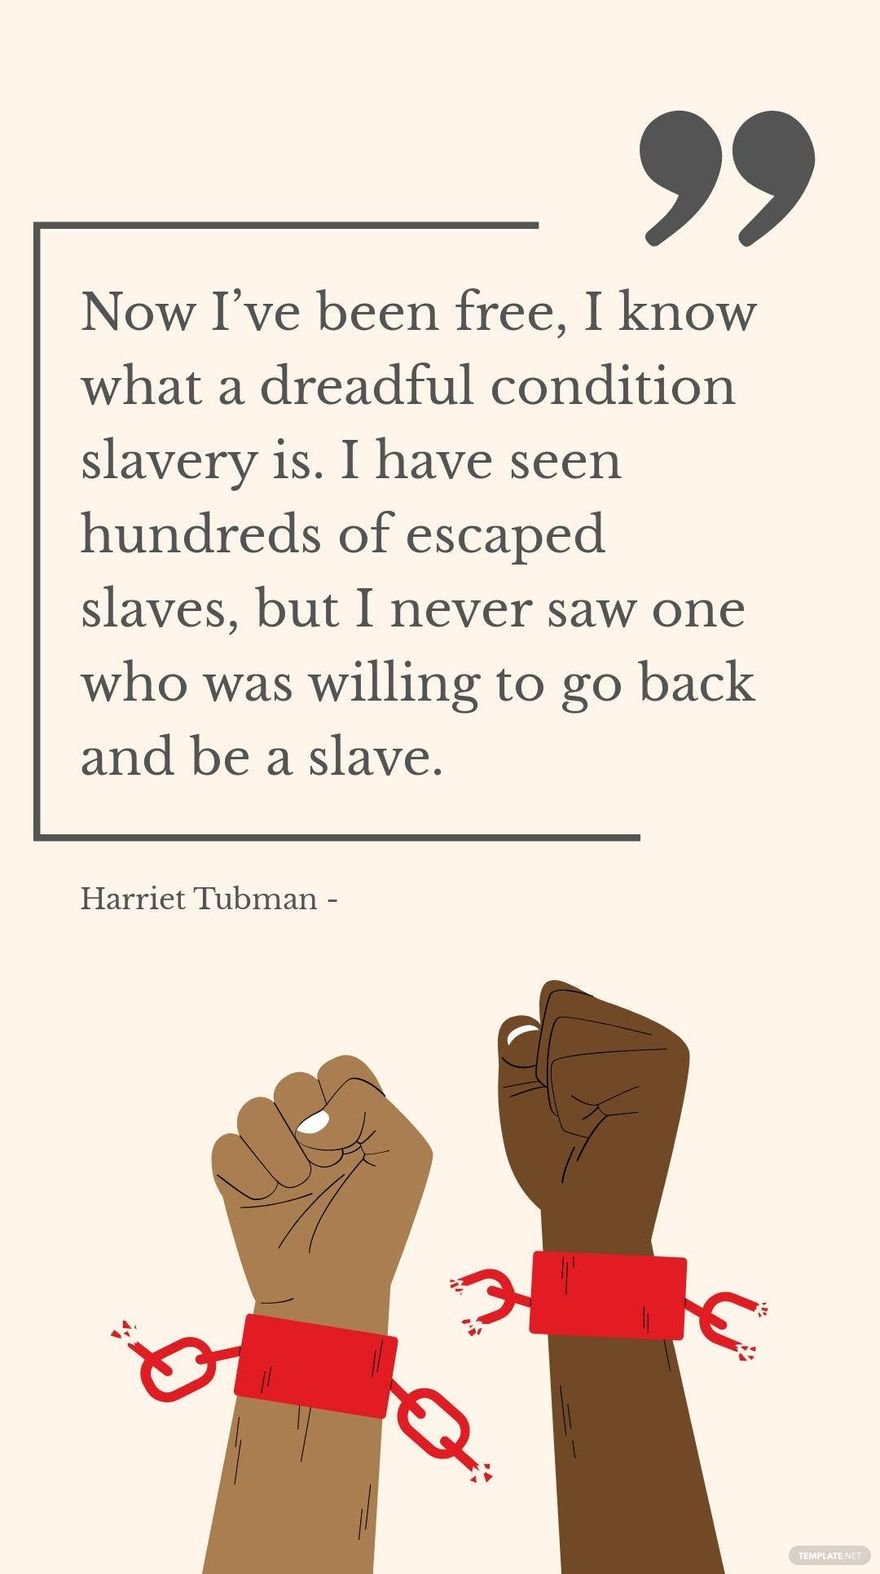 Harriet Tubman - Now I’ve been free, I know what a dreadful condition slavery is. I have seen hundreds of escaped slaves, but I never saw one who was willing to go back and be a slave.